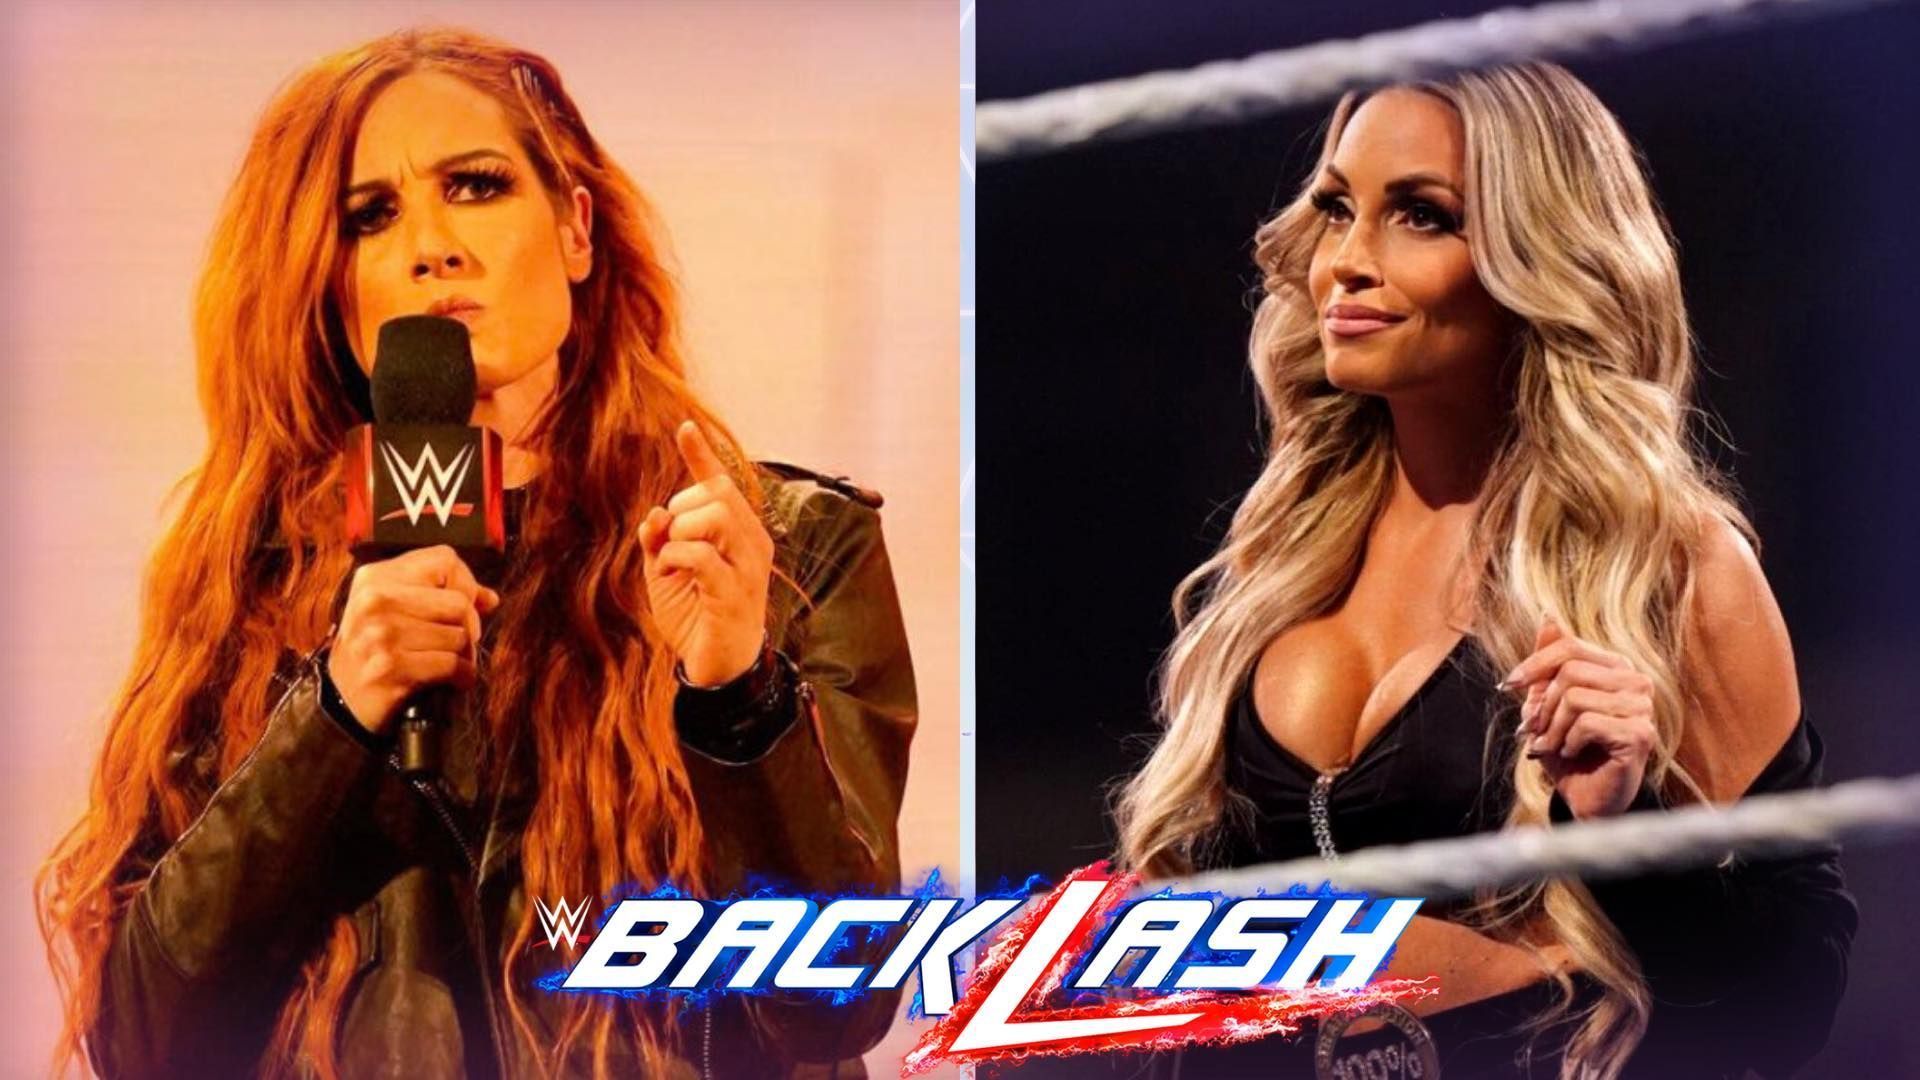 Becky Lynch could potentially compete at WWE Backlash